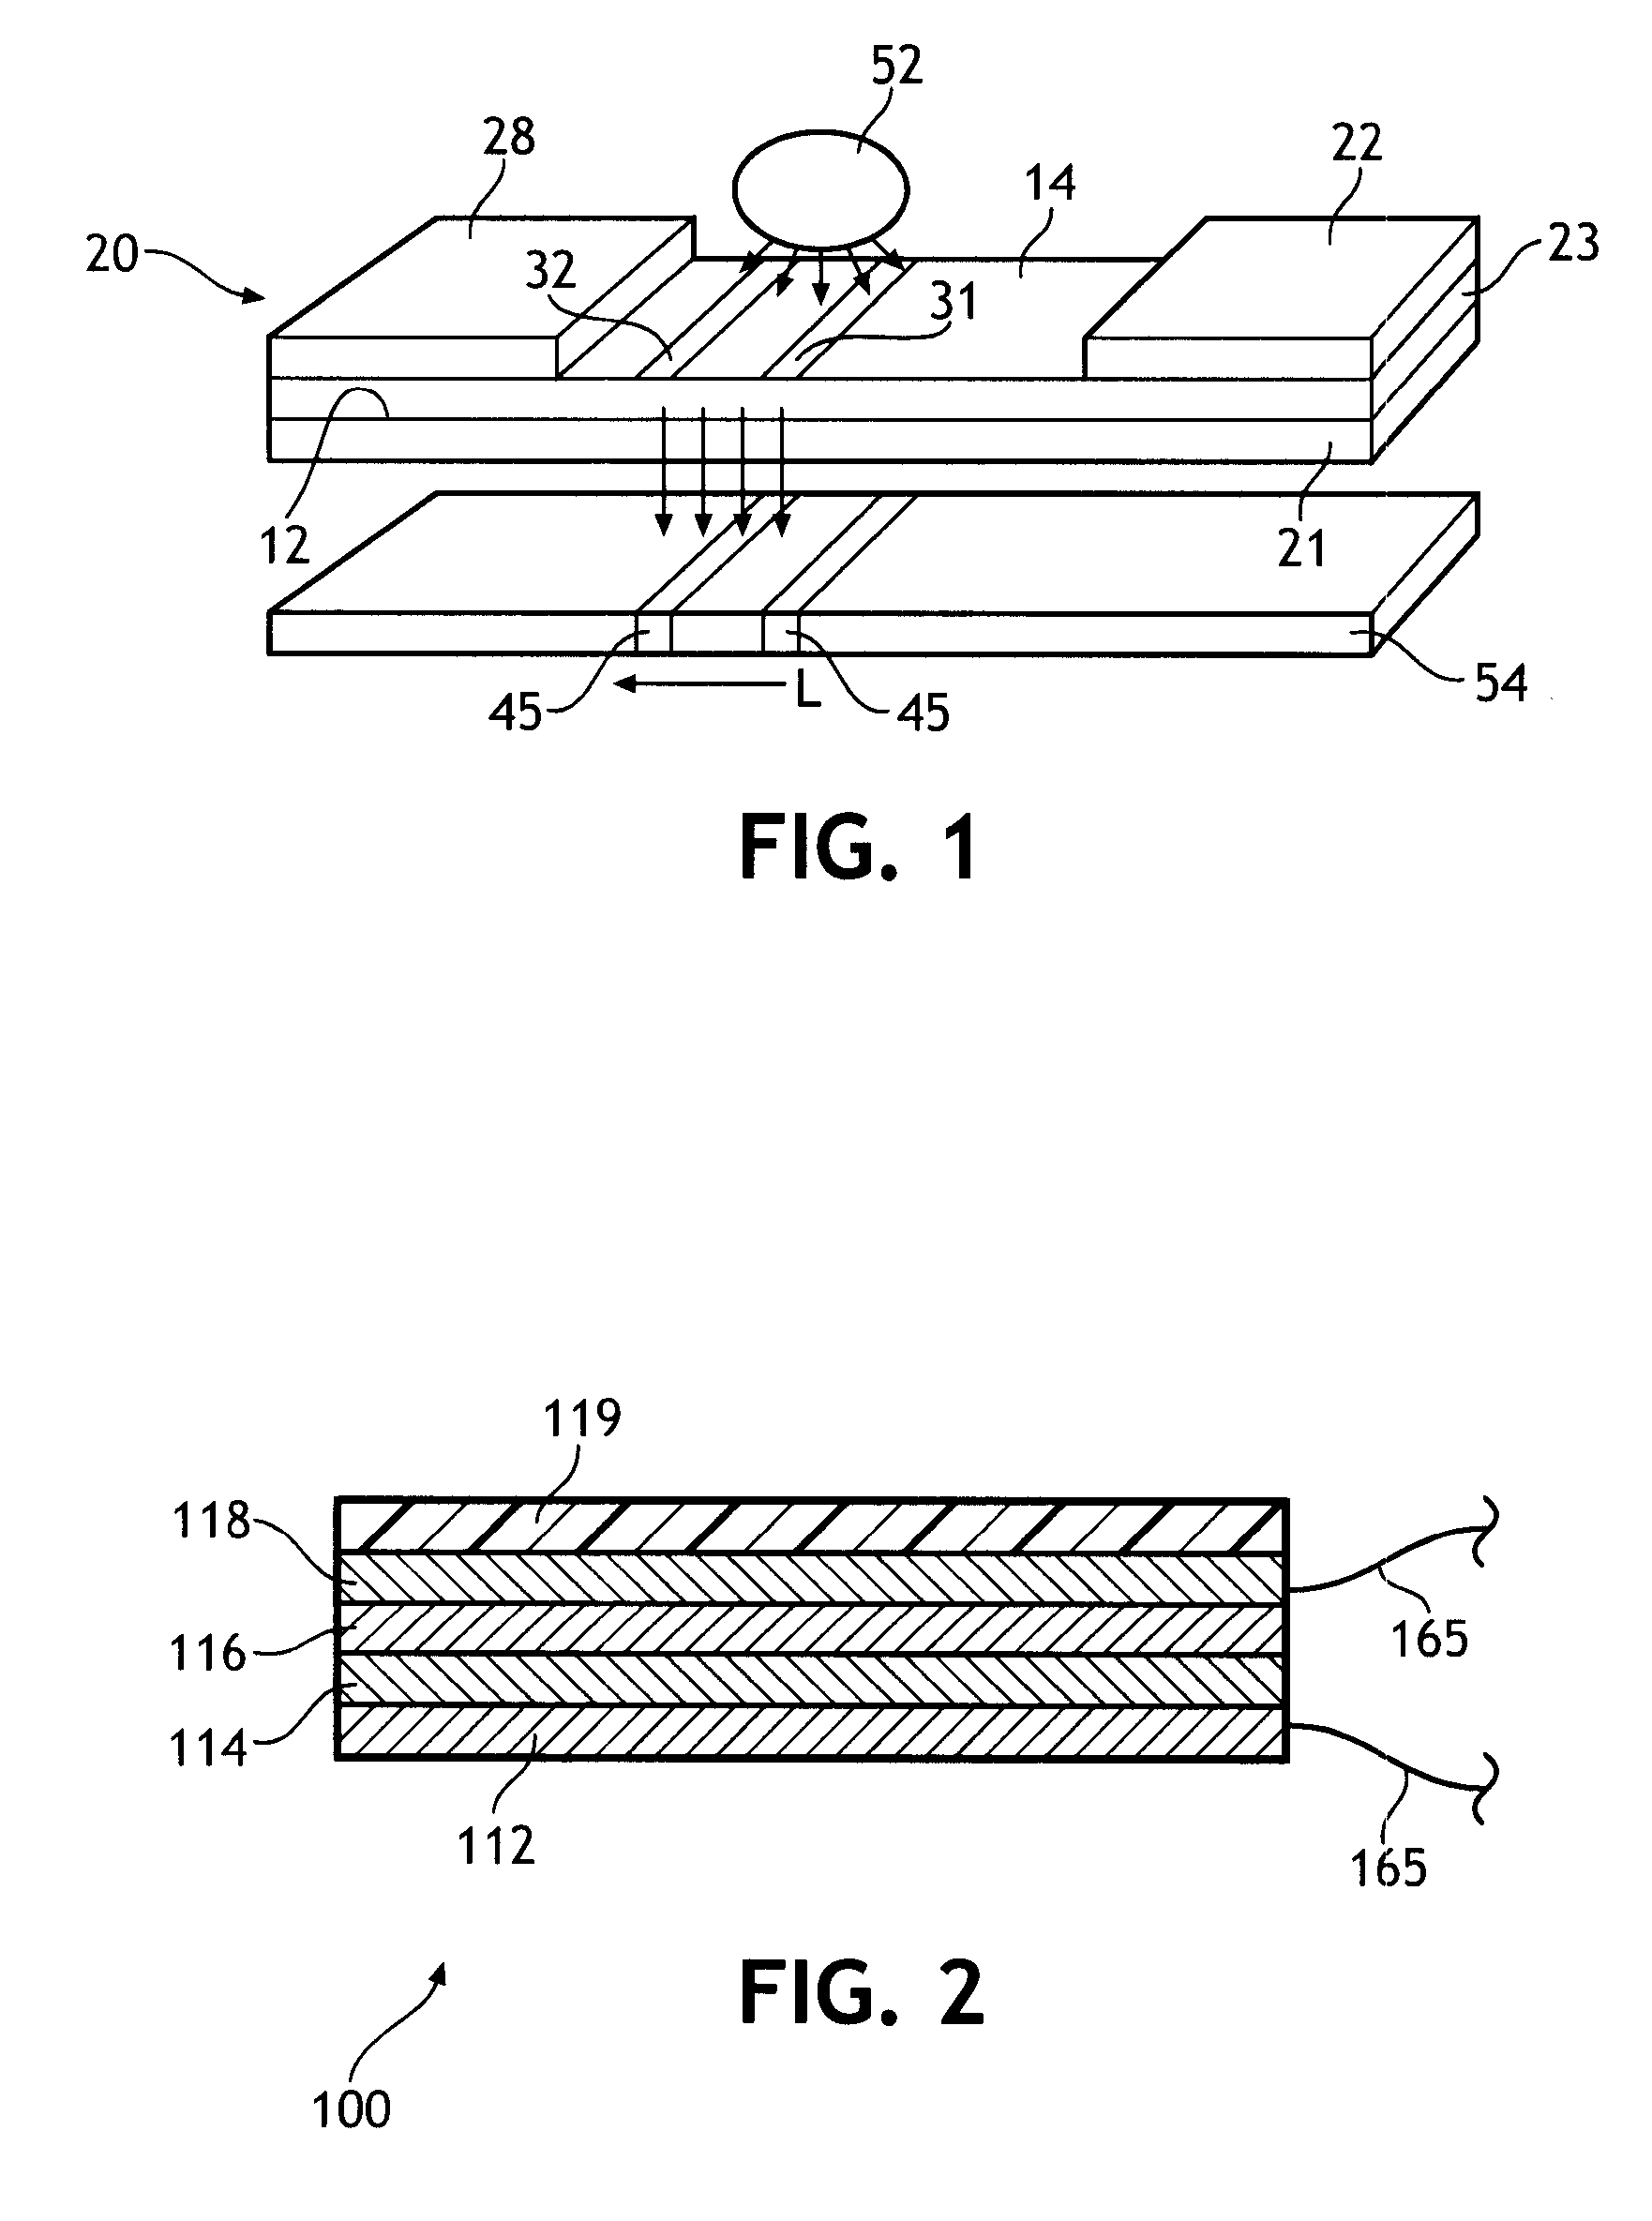 Transmission-based optical detection systems